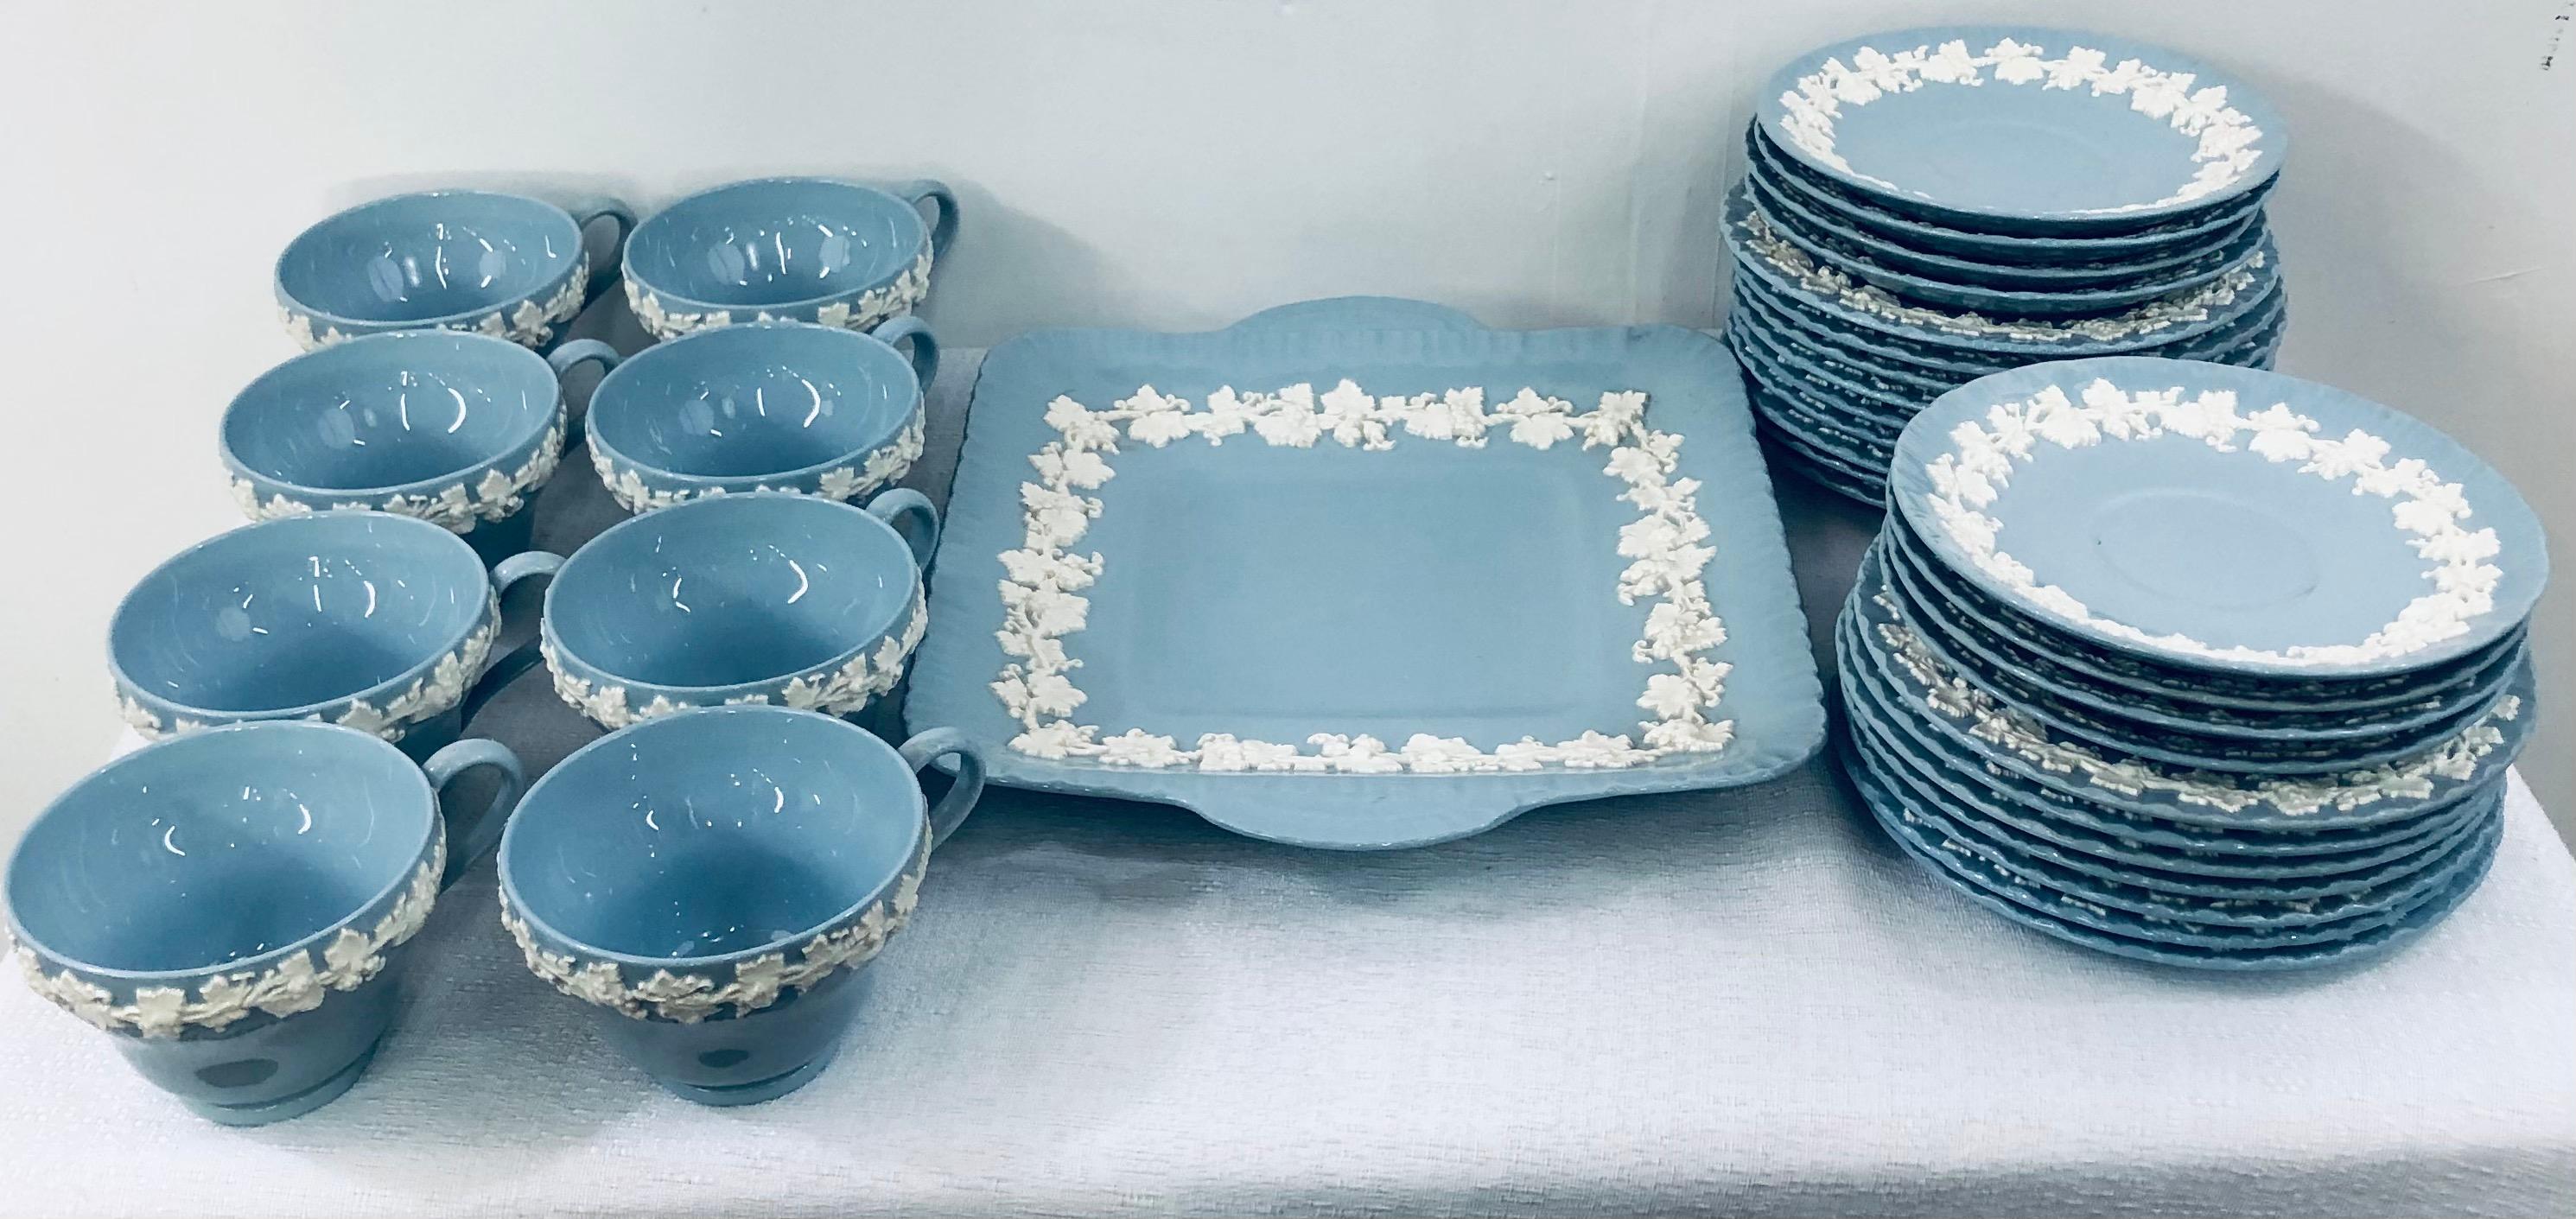 A large set of 33 pieces of the beautiful English Wedgwood Jasperware in Wedgwood blue. Each piece features a white design depicting white sprigged reliefs of Acanthus leaves and flowers. The set contains 8 coffee or tea cups, 8 saucers plates, 16